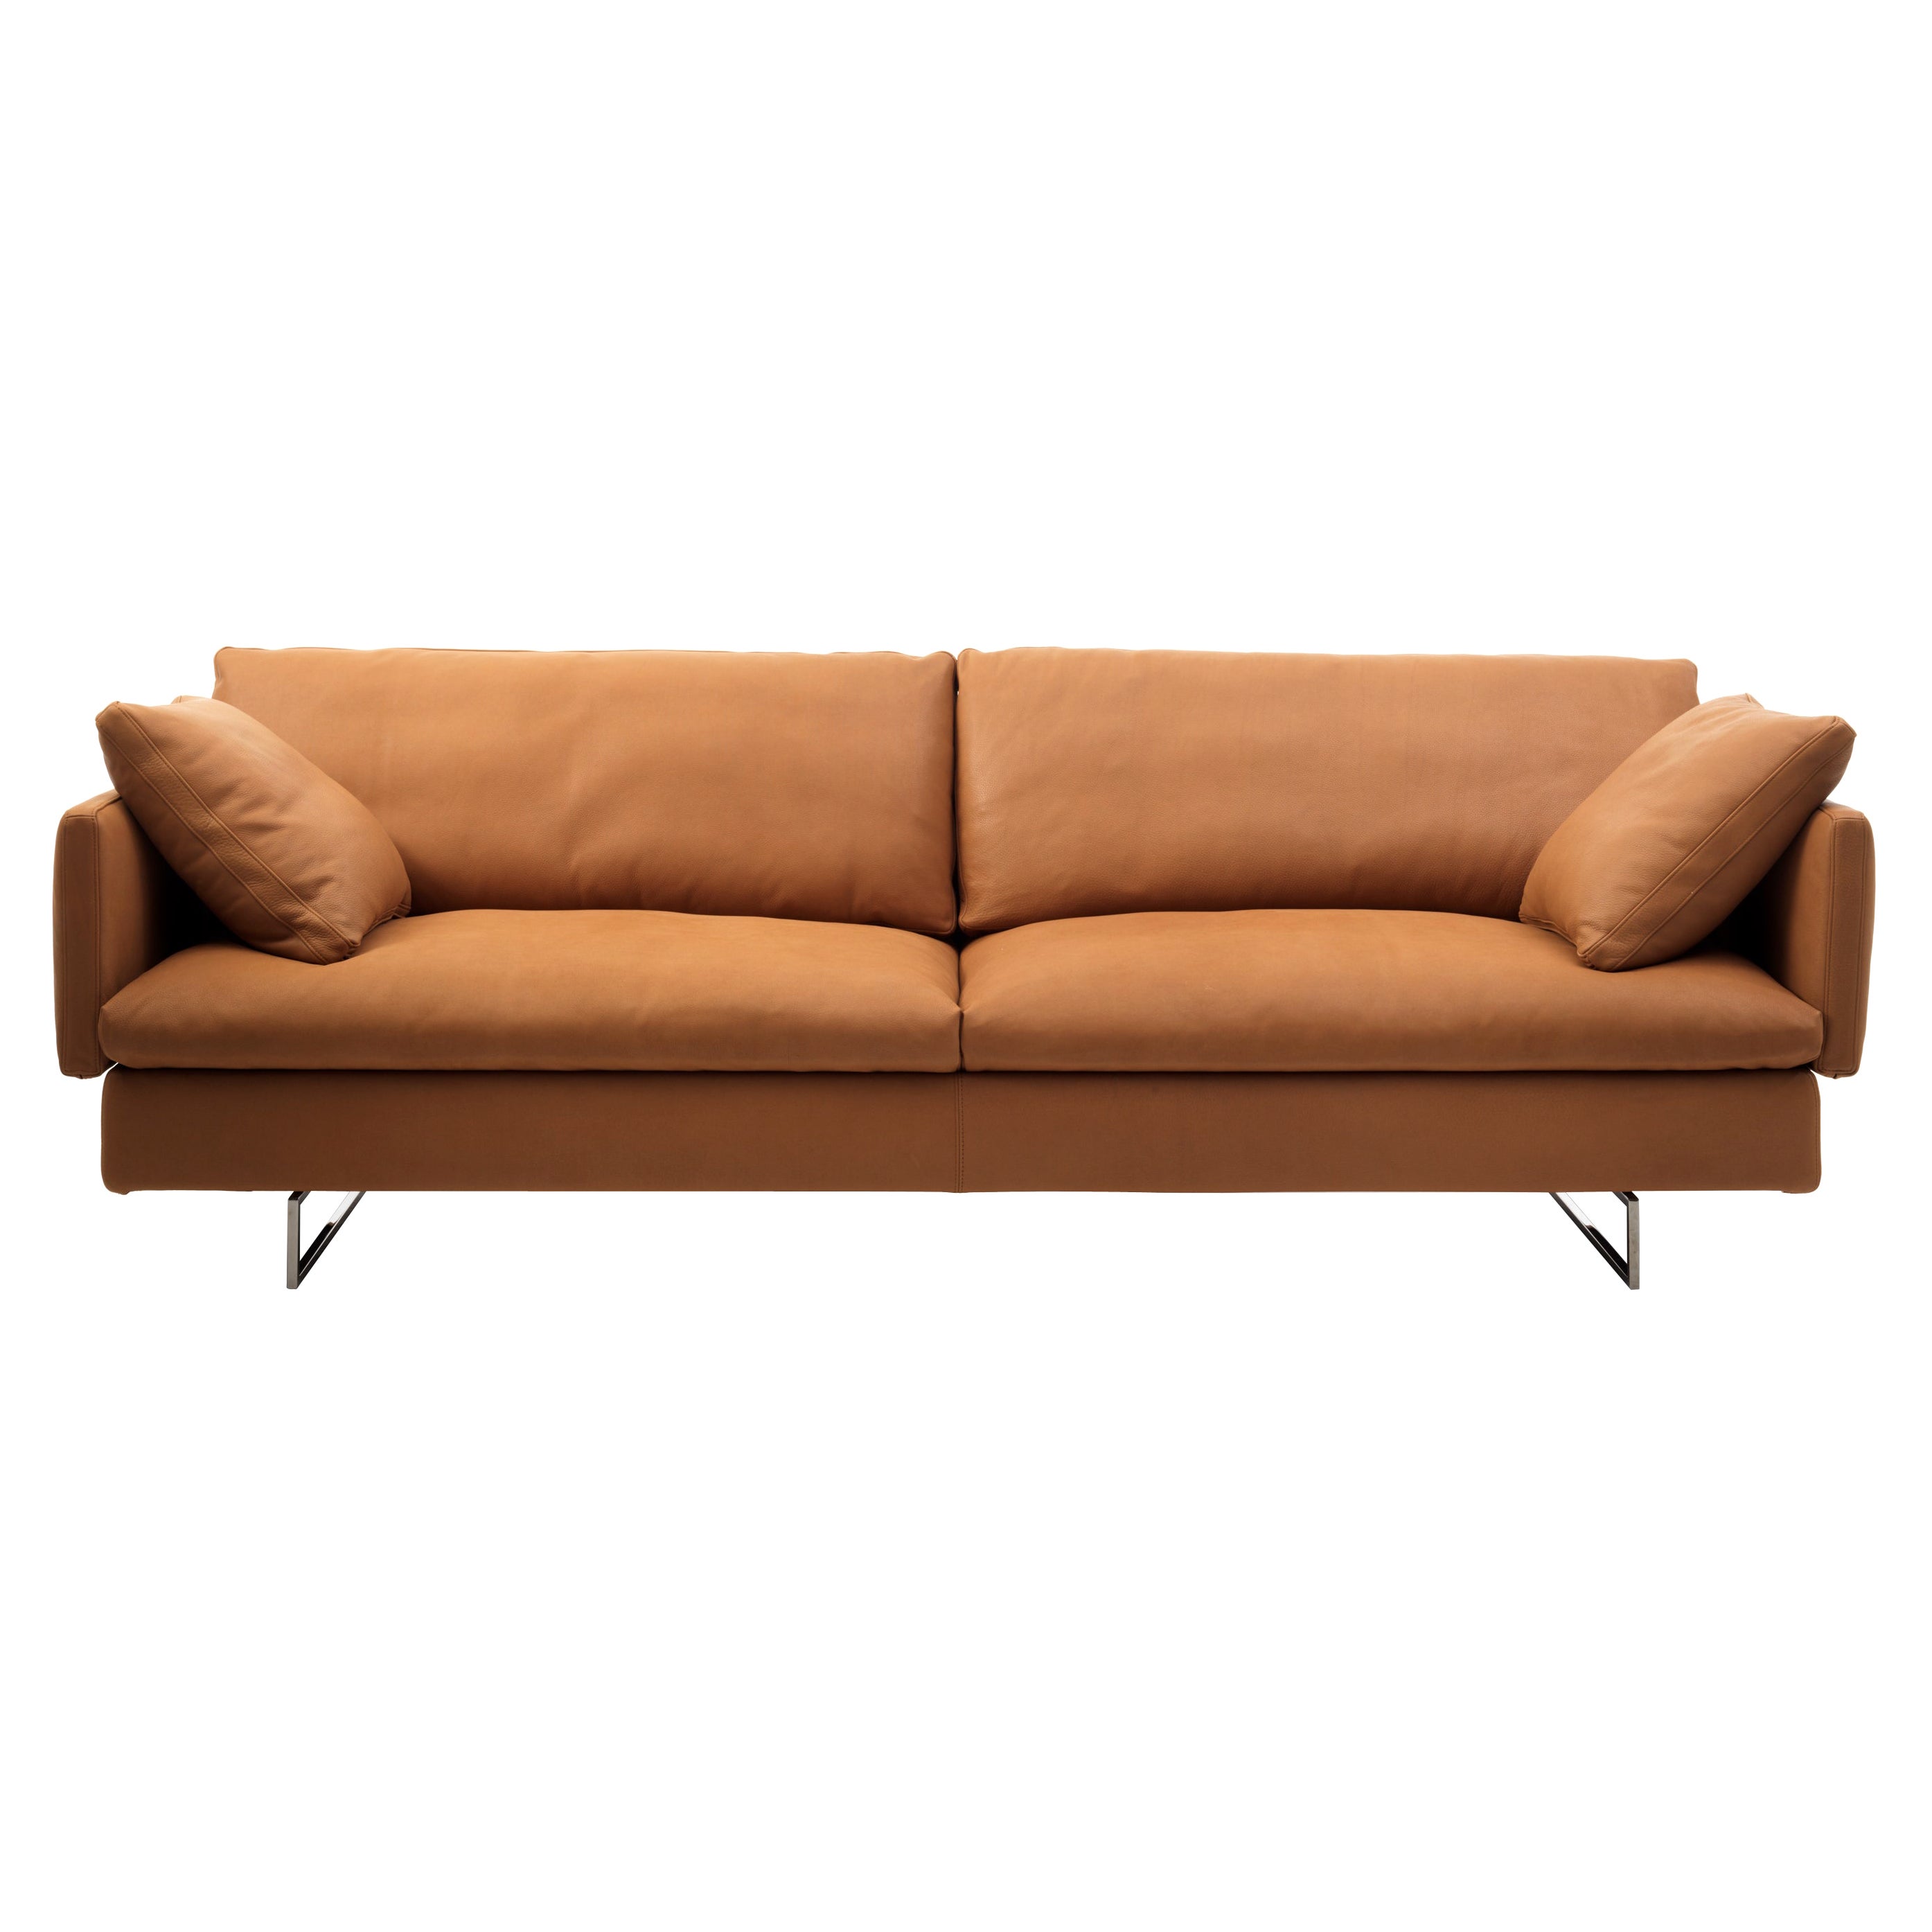 Voyage Sofa in Natural Leather Upholstery & Black Nickel Frame by Sergio Bicego For Sale